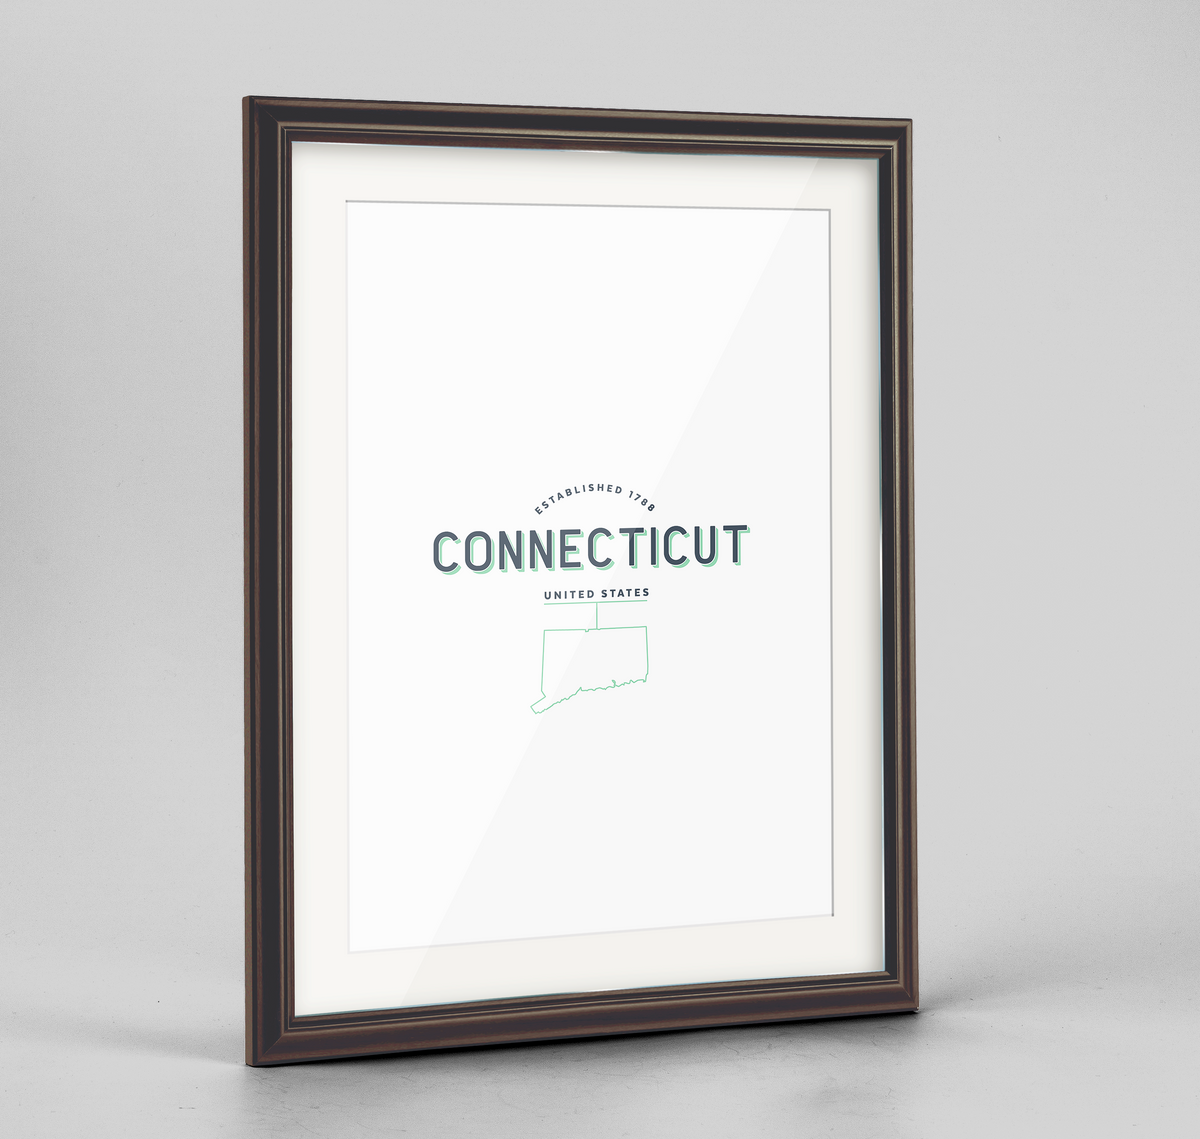 Connecticut Word Art Frame Print - State Line